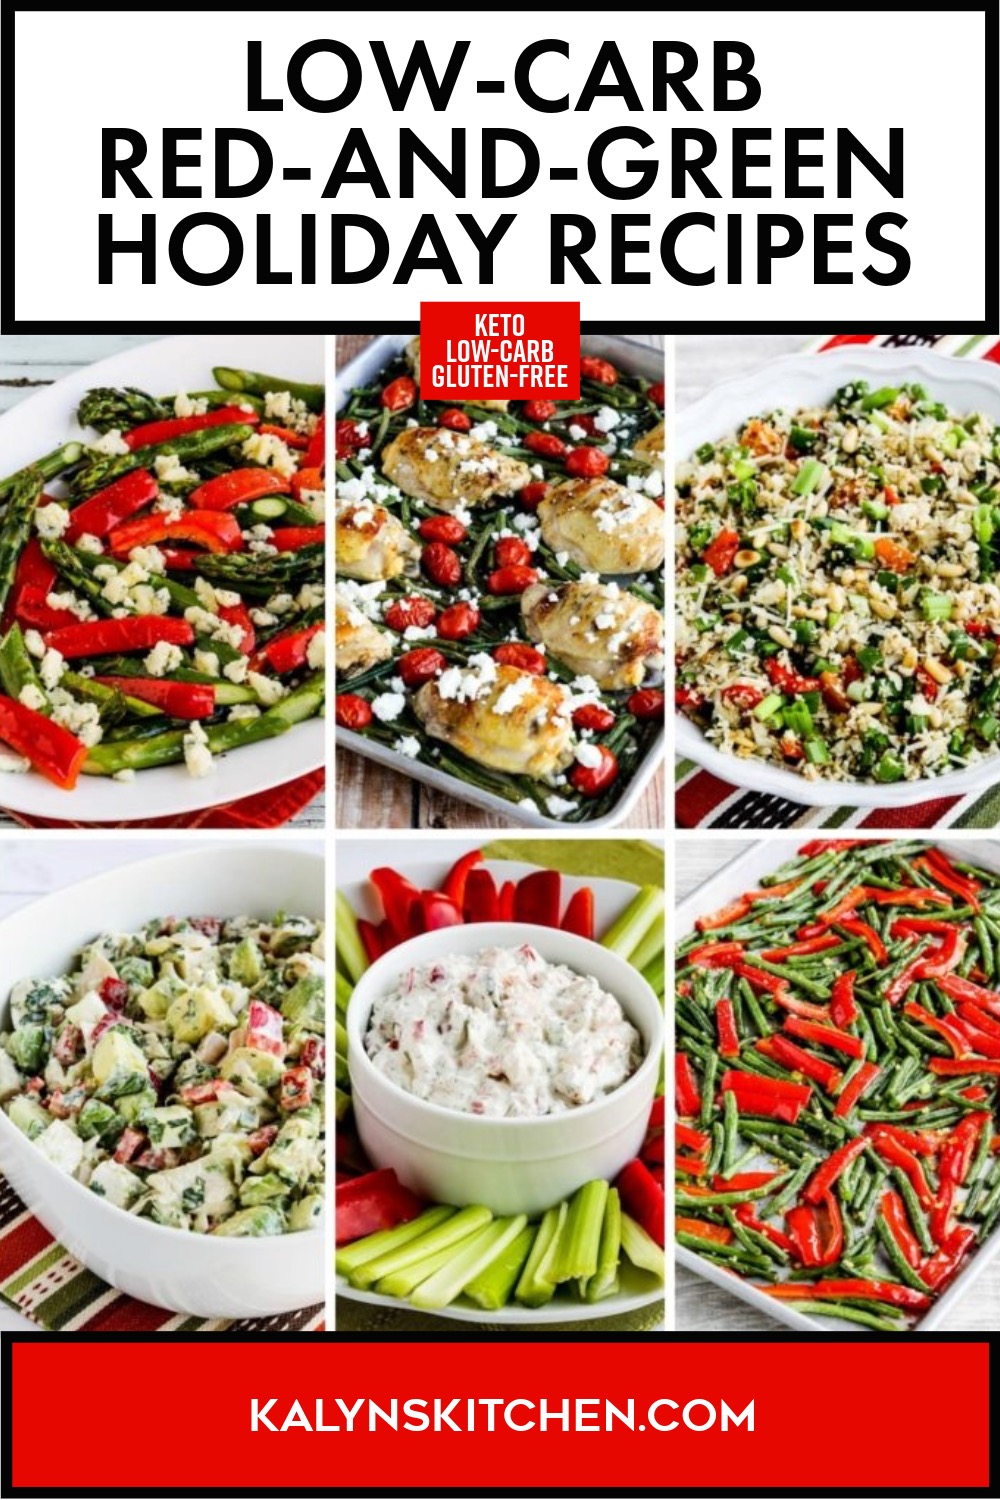 Low-Carb Red-and-Green Holiday Recipes – Kalyn's Kitchen